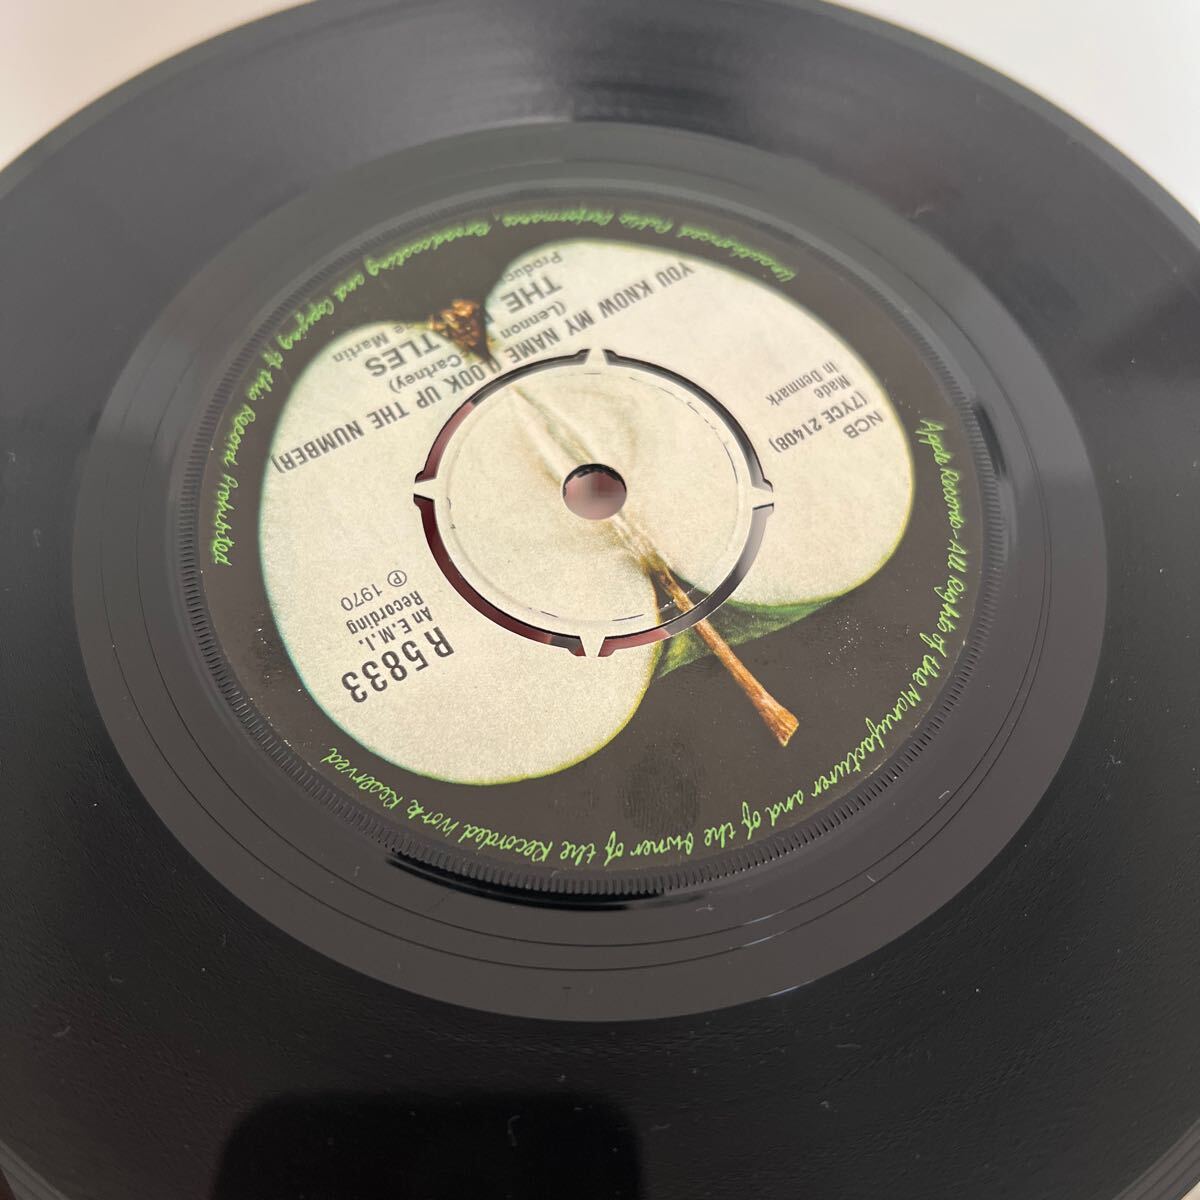  height sound quality Denmark record UK the first times same modification mato1U BEATLES LET IT BE Beatles let ito Be EP 7 -inch single record Denmark R5833